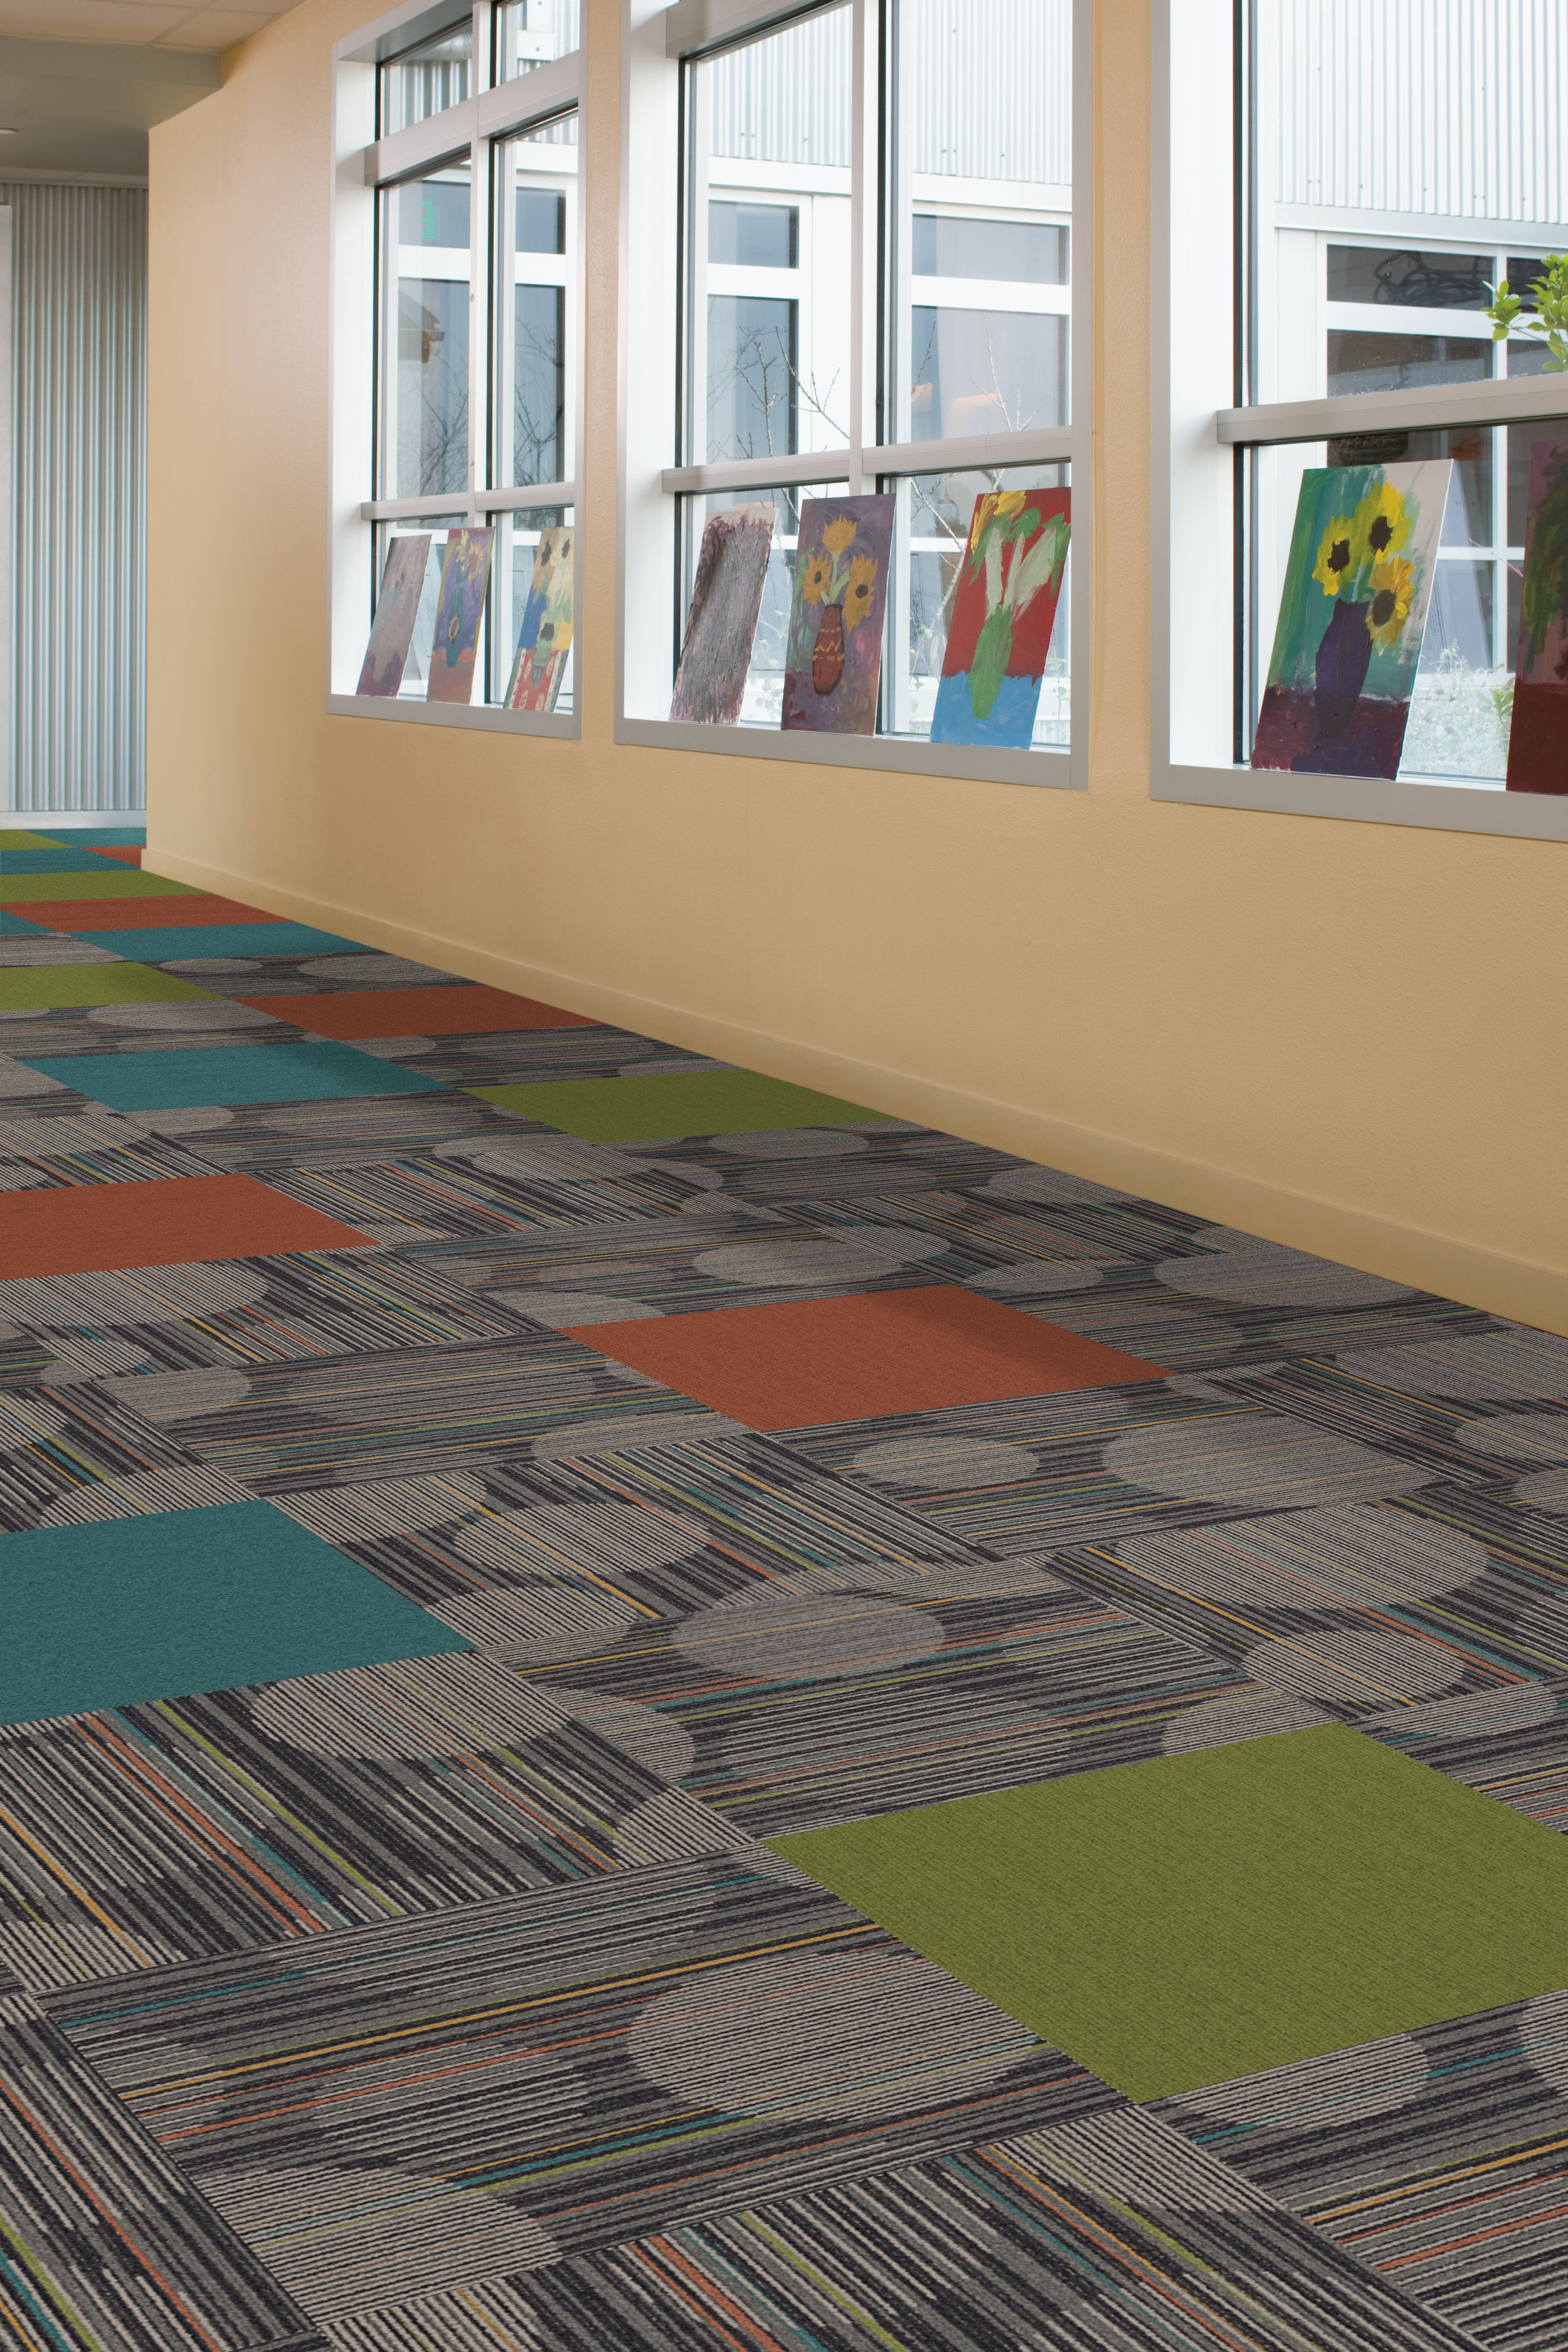 Interface Extra Curricular and Viva Colores carpet tiles in school hallway with student artwork in windows numéro d’image 2